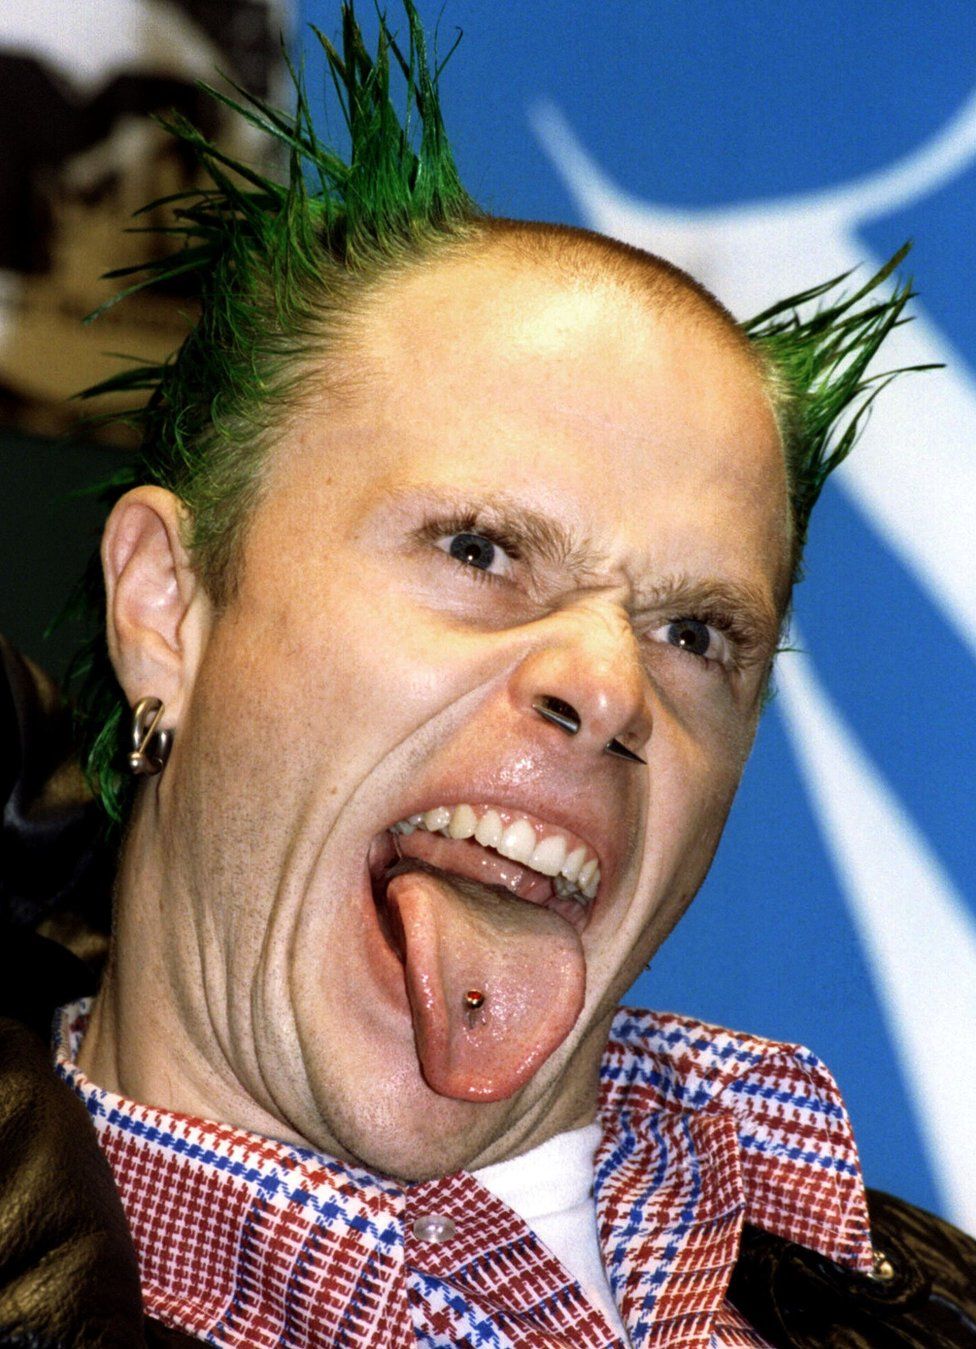 The Prodigy lead singer Keith Flint sticks out his tongue at press photographers during the 1996 MTV Europe Music Awards gala in London